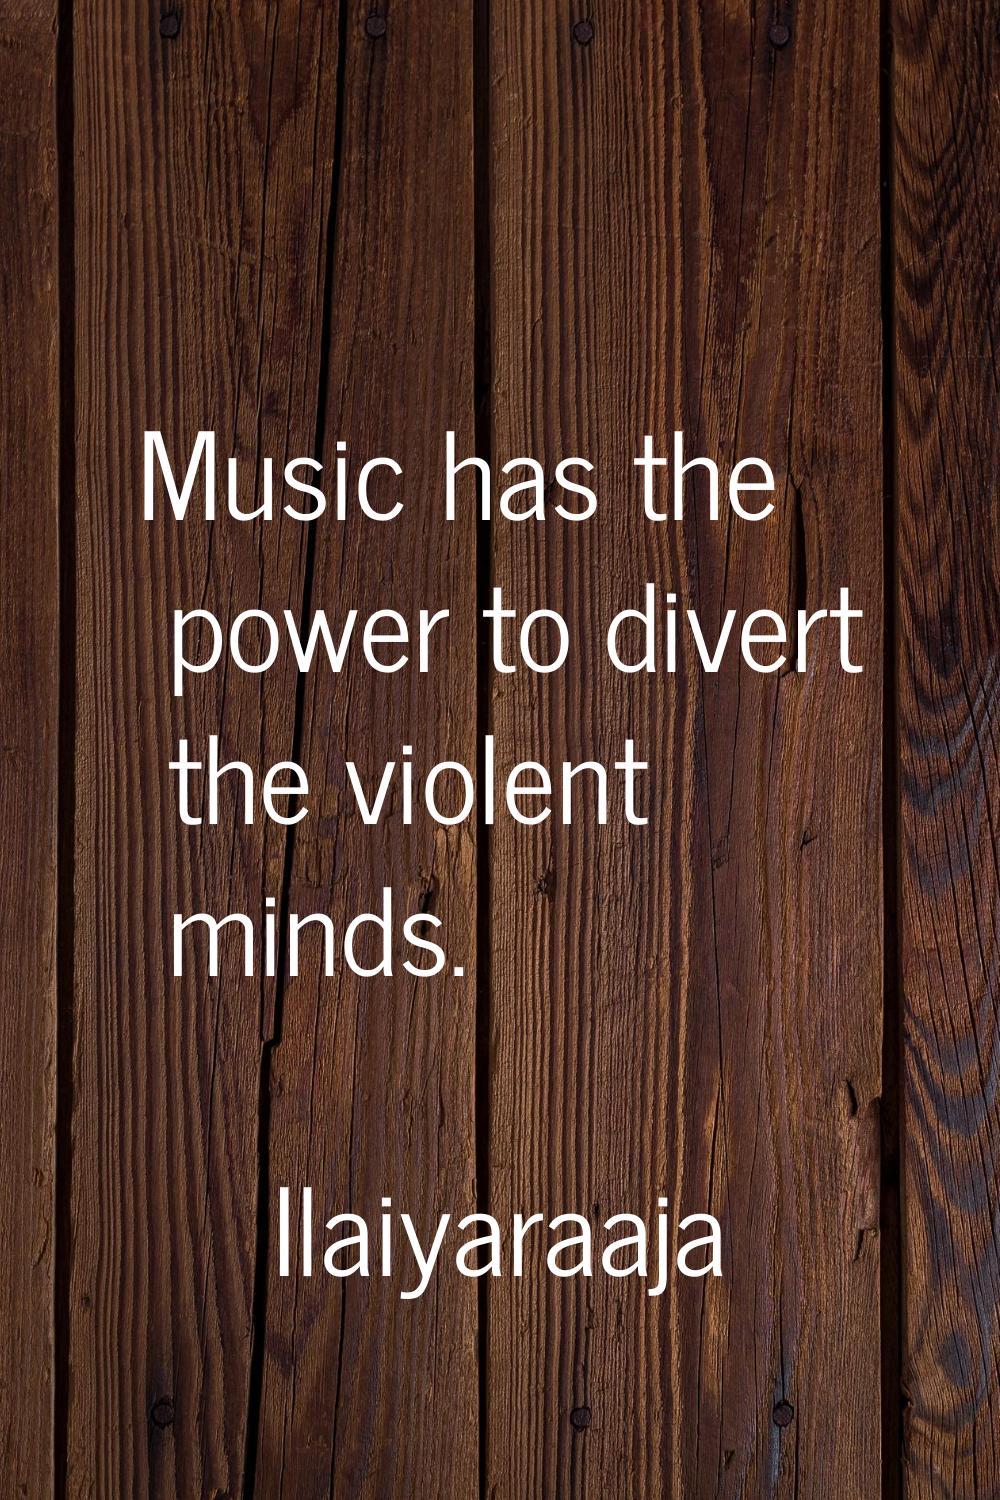 Music has the power to divert the violent minds.